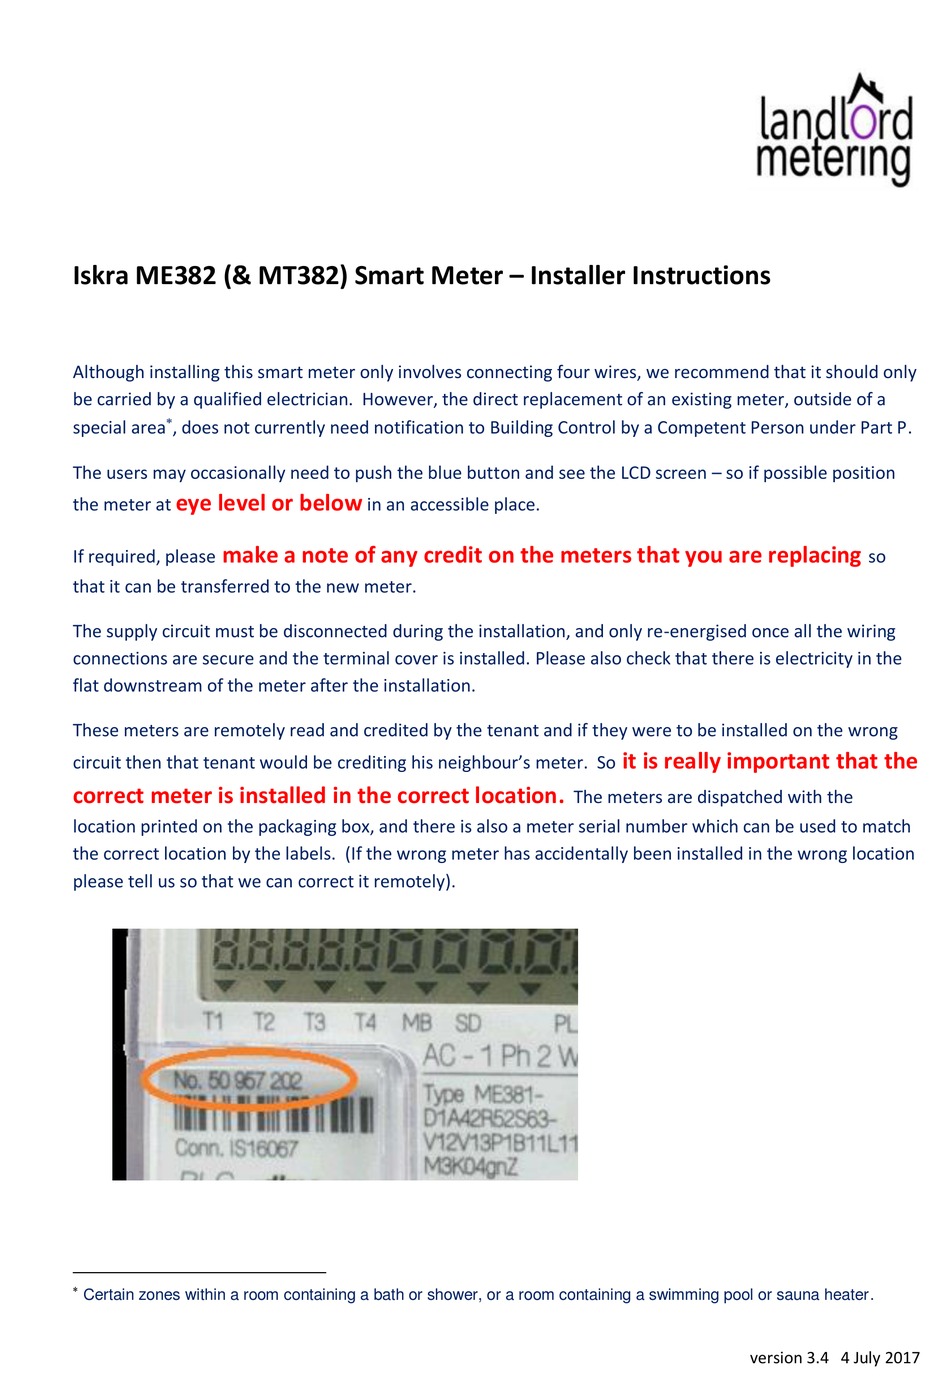 Landlords Iskra ME382 electric prepay single phase electricity meter 